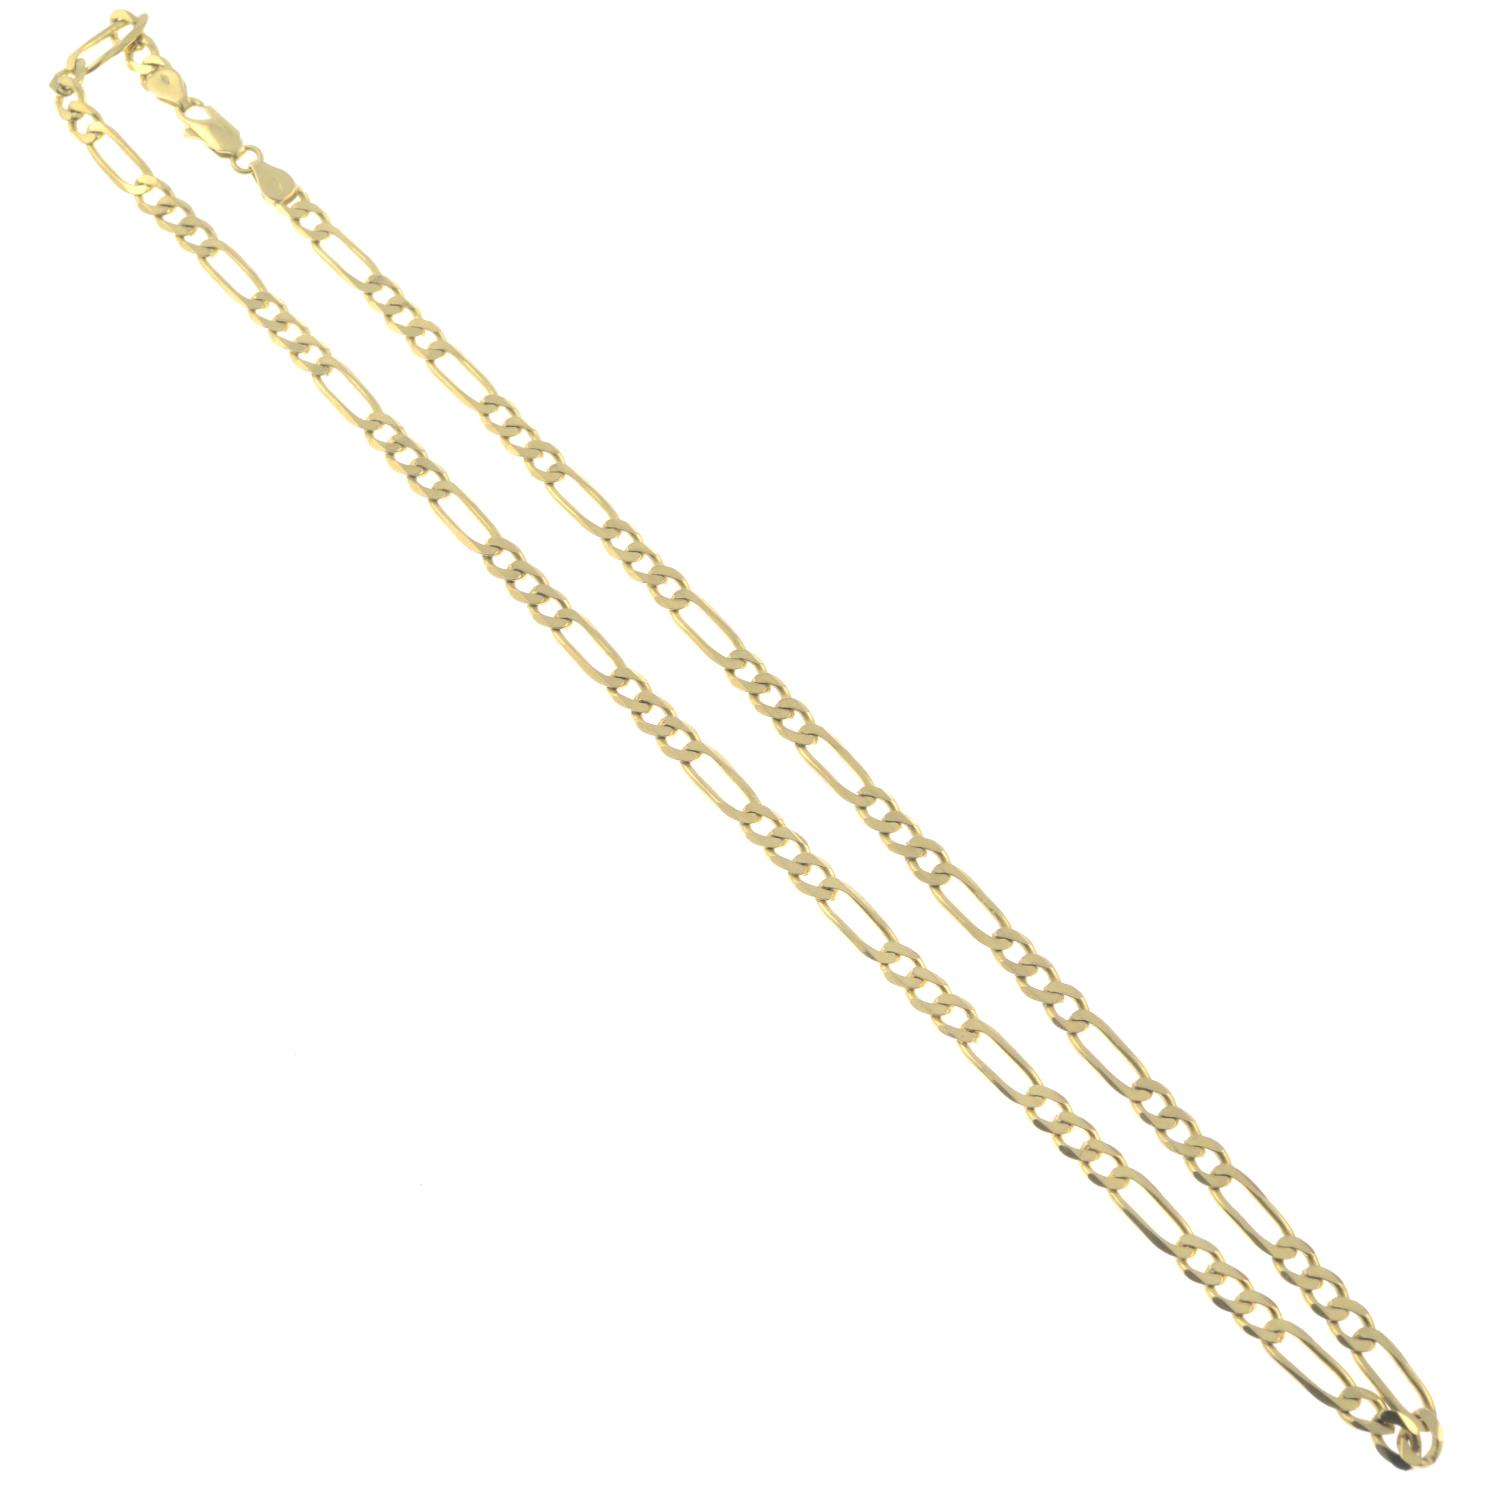 A 9ct gold Figaro-link chain.Hallmarks for 9ct gold. - Image 2 of 2